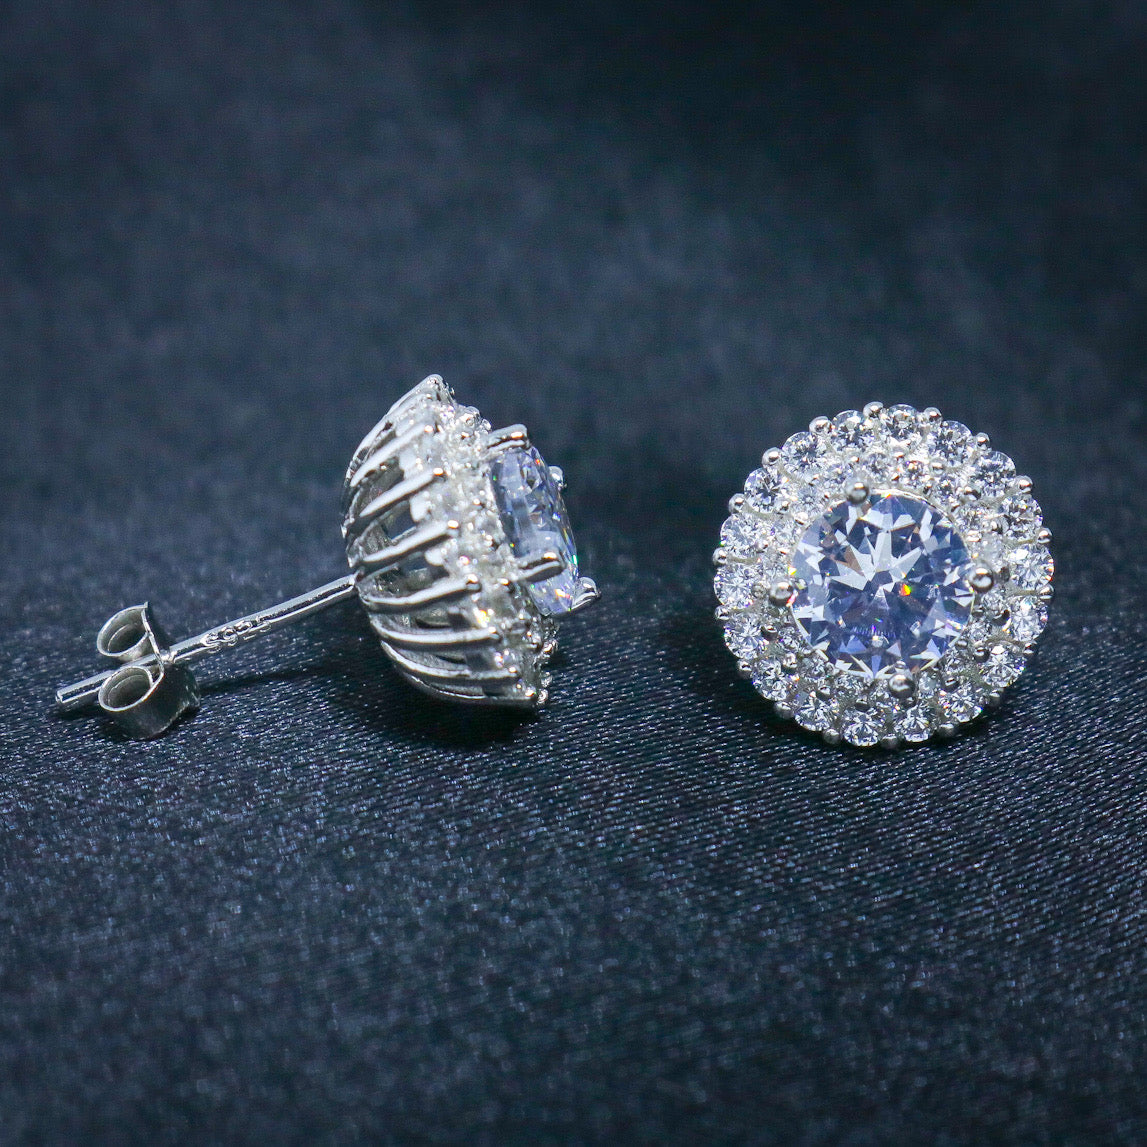 Real 925 Silver - Iced Out Round Diamond Stud Earrings